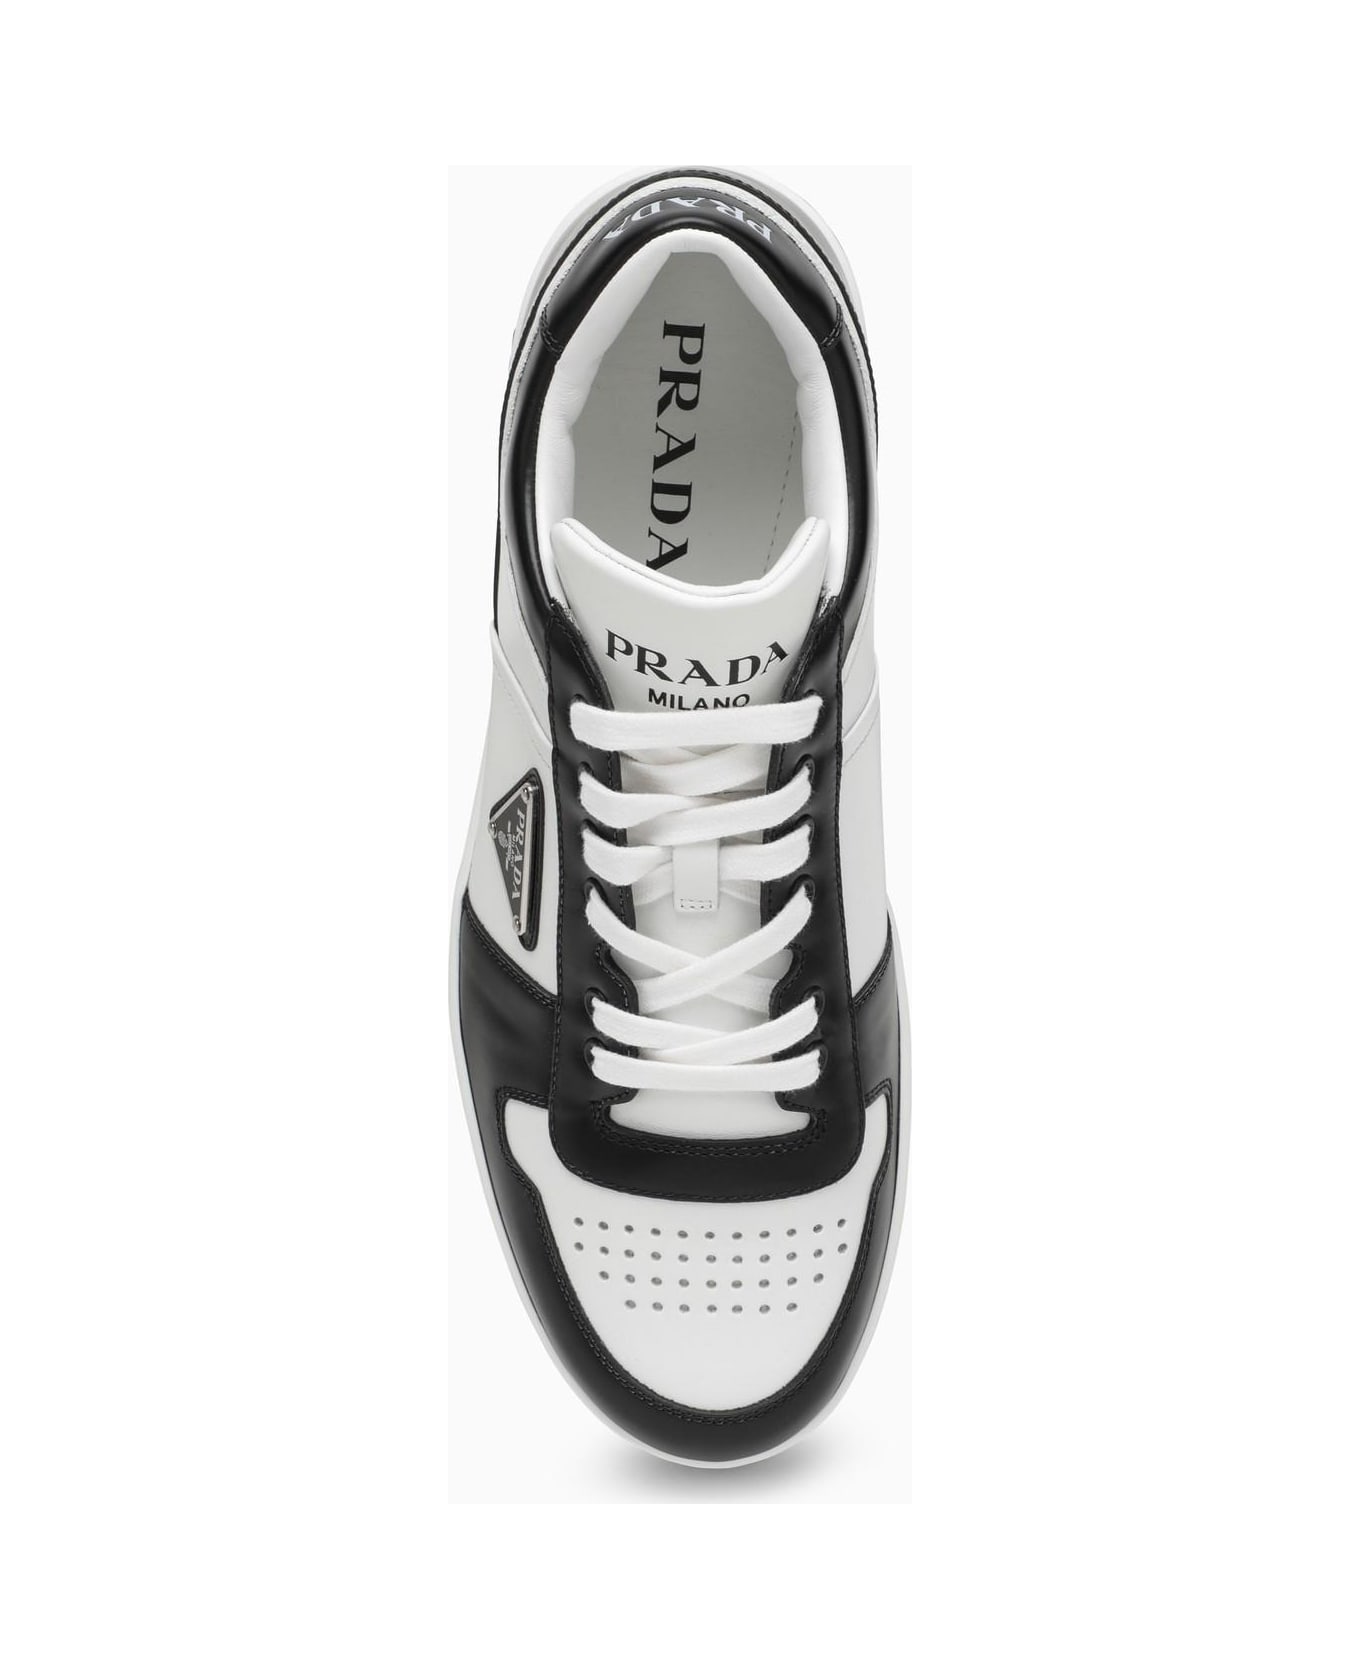 Prada White\/black Leather Holiday Low-top Sneakers - F Bianco E Nero スニーカー